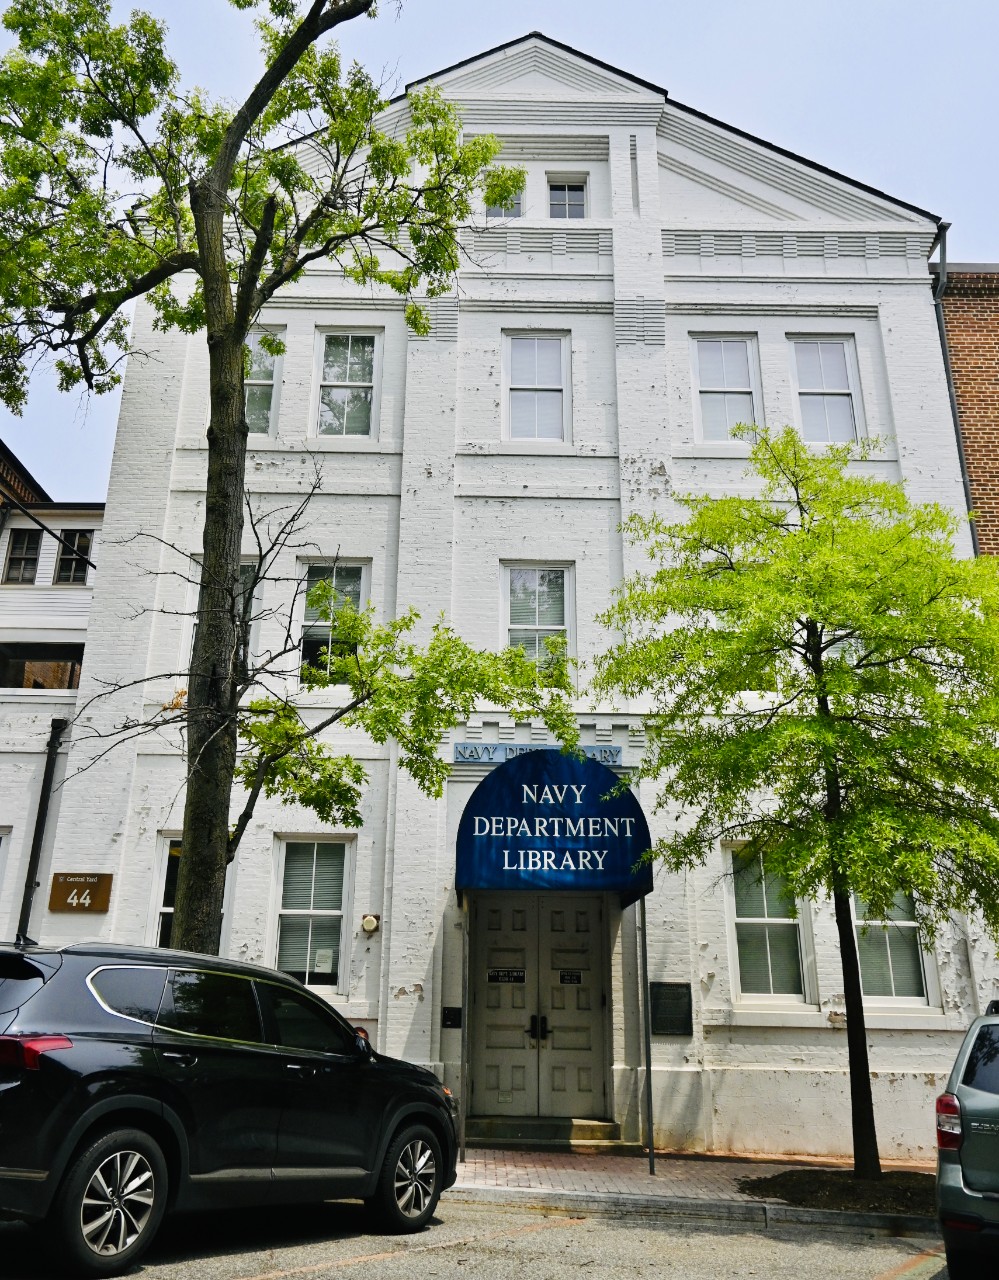 Entrance of the previous Navy Department Library facility which commenced relocation to a refurbished site on the historic Washington Navy Yard. The new Naval History and Research Center, a state-of-the-art, 2-floor structure, seamlessly combines...